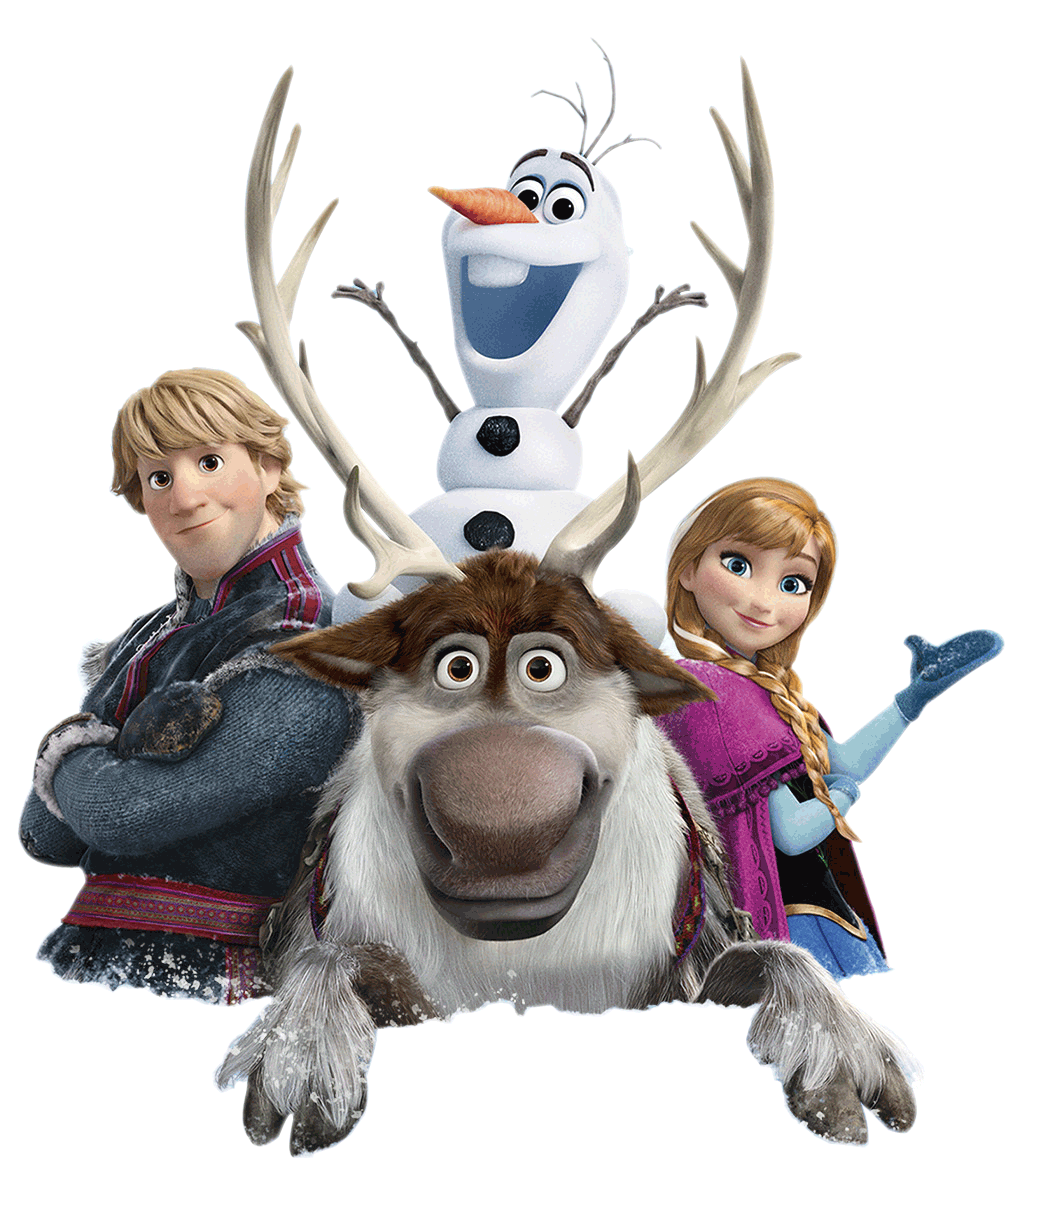 Download Frozen Characters Free Download Image HQ PNG Image | FreePNGImg